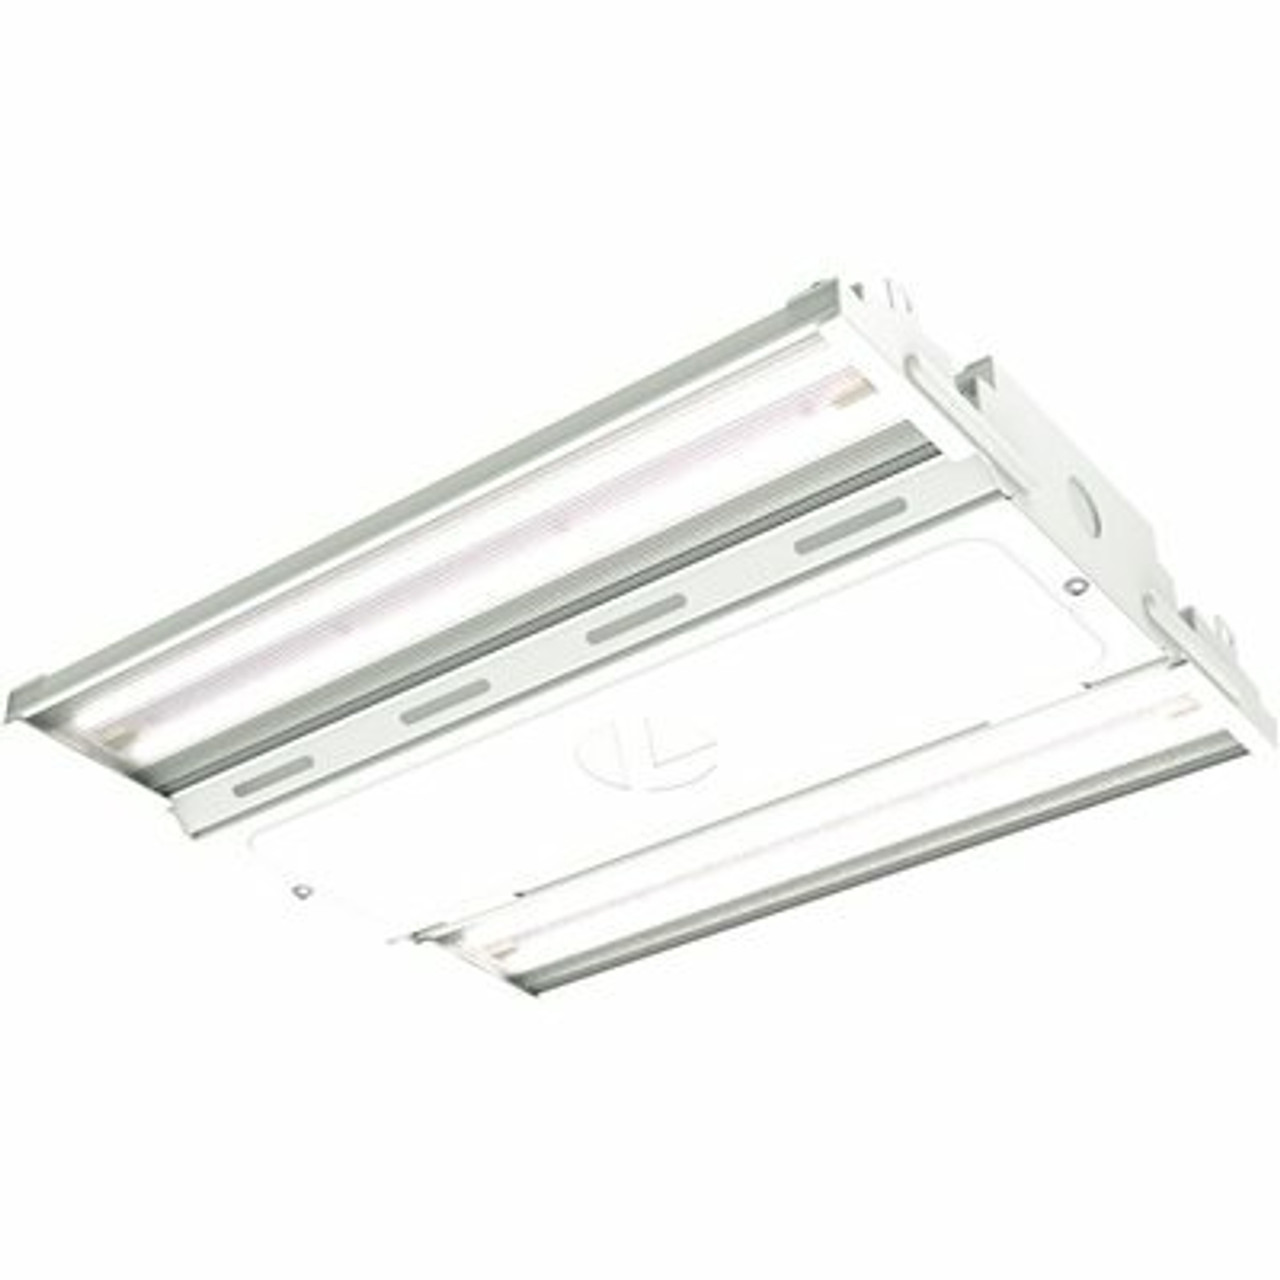 Lithonia Lighting Contractor Select 1.2 Ft. 200-Watt Equivalent Integrated Led Dimmable White High Bay Light, 4000K